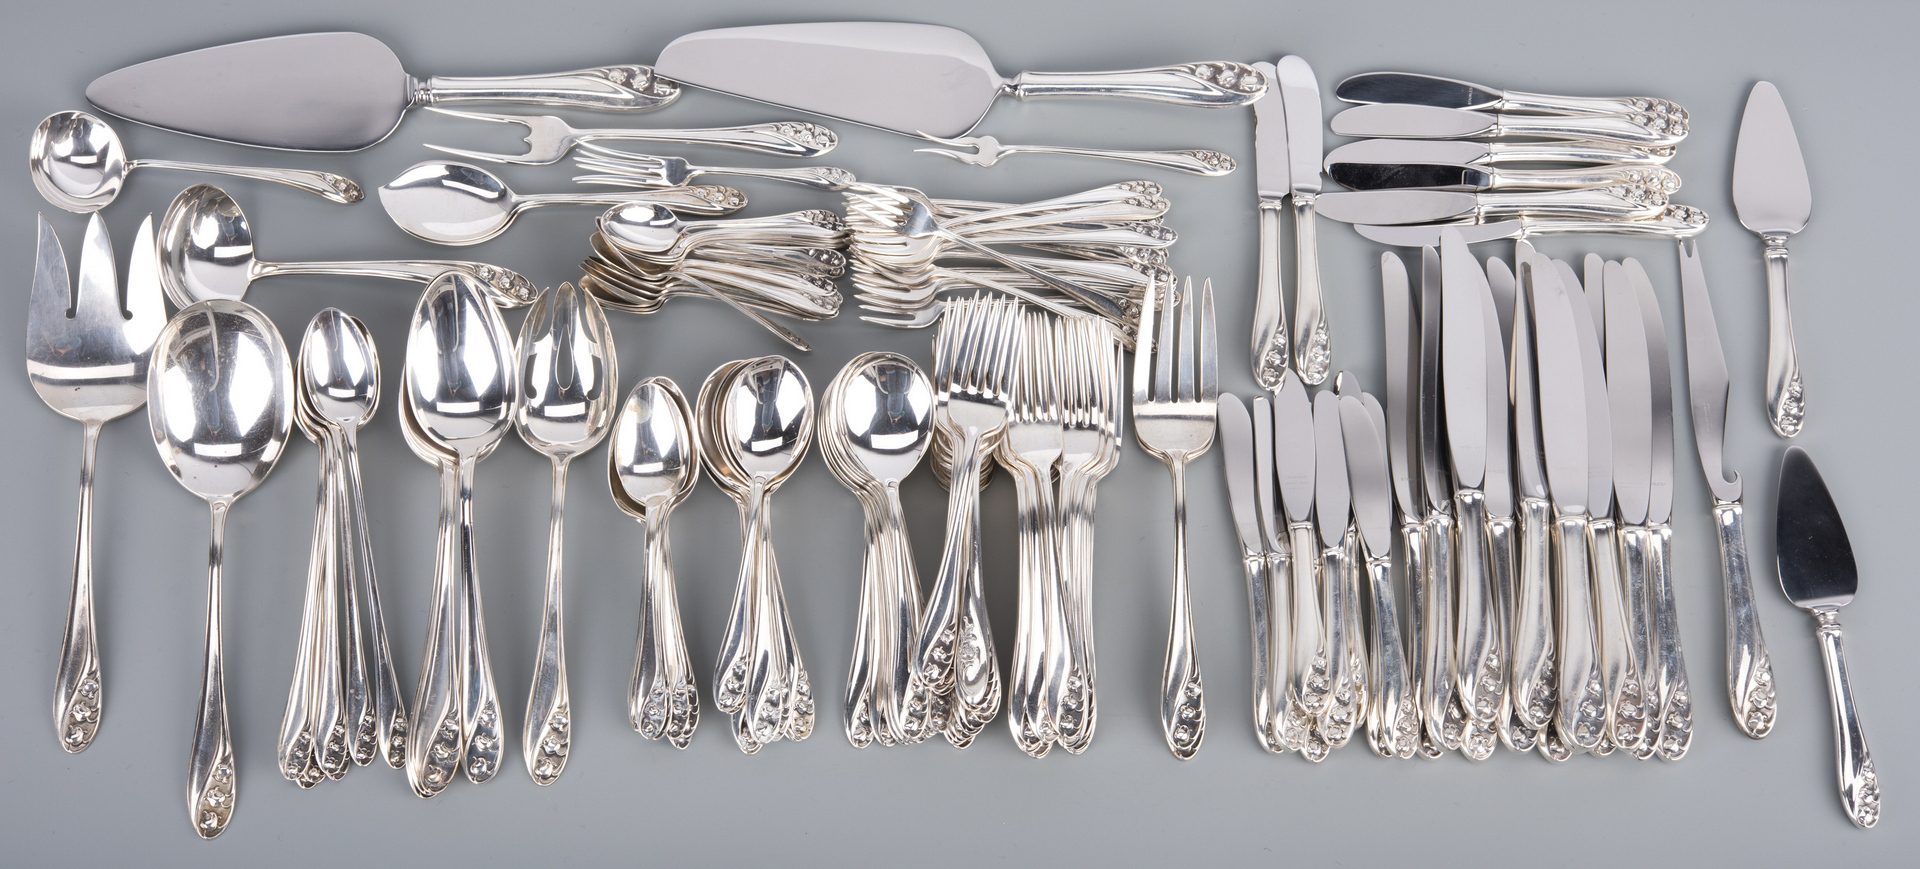 Lot 76: Gorham Lily of Valley Sterling Flatware, 143 pcs